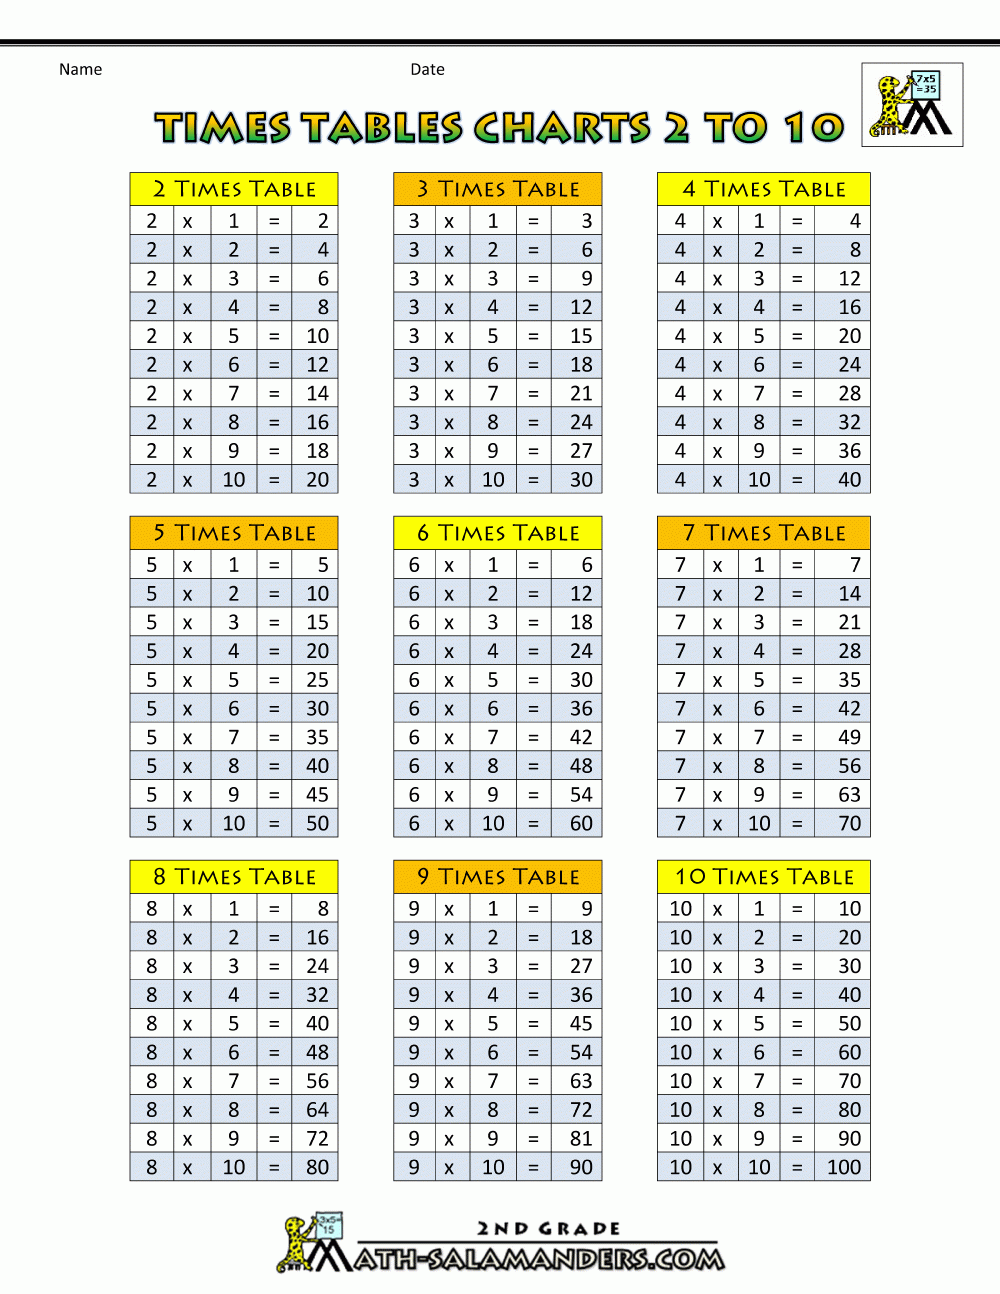 8times table chart